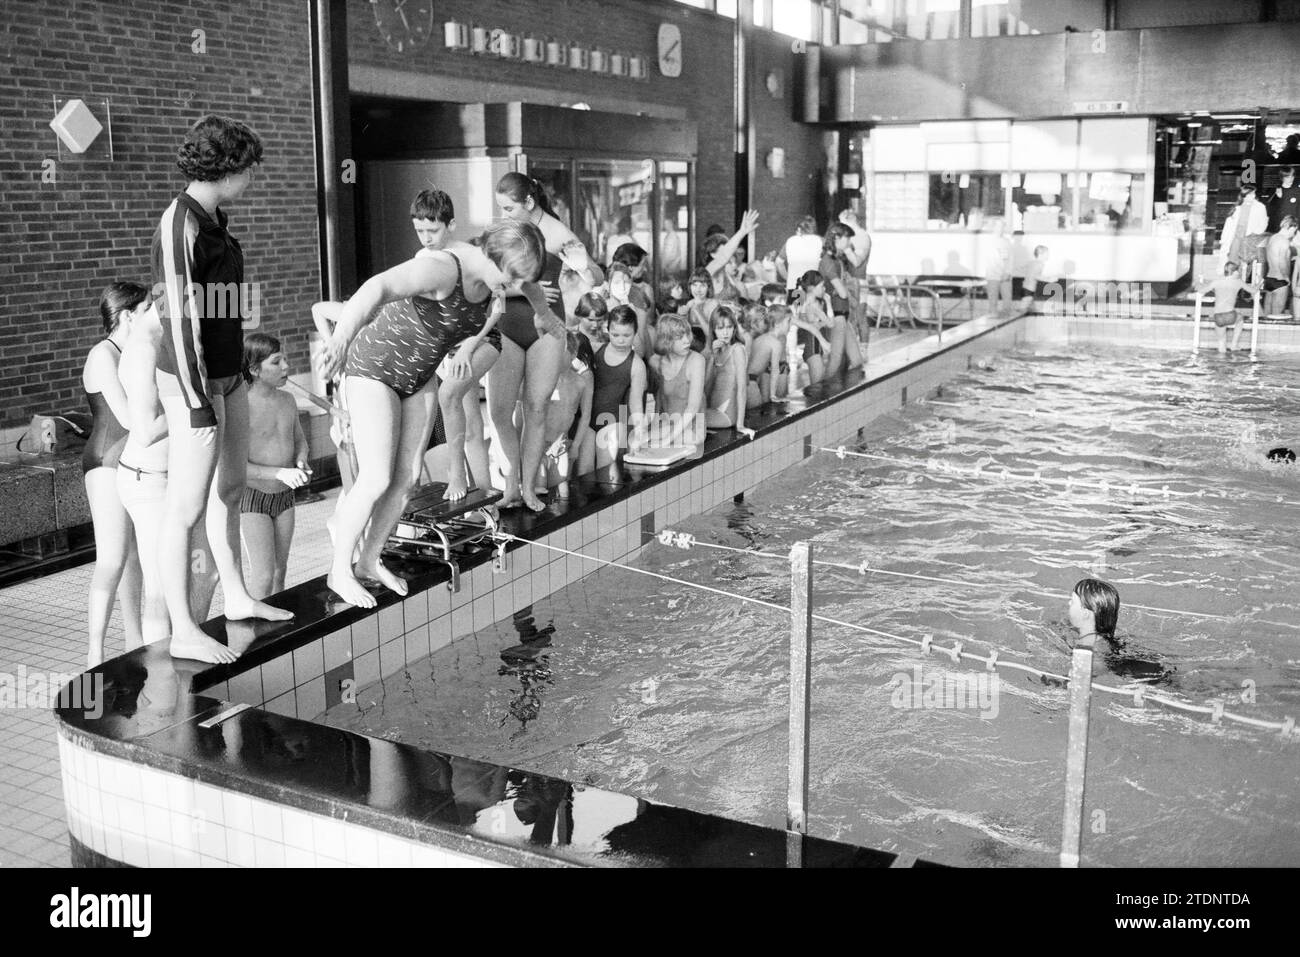 Swimming in the De Planete swimming pool, Haarlem, Planetenlaan, The Netherlands, 00-02-1982, Whizgle News from the Past, Tailored for the Future. Explore historical narratives, Dutch The Netherlands agency image with a modern perspective, bridging the gap between yesterday's events and tomorrow's insights. A timeless journey shaping the stories that shape our future Stock Photo